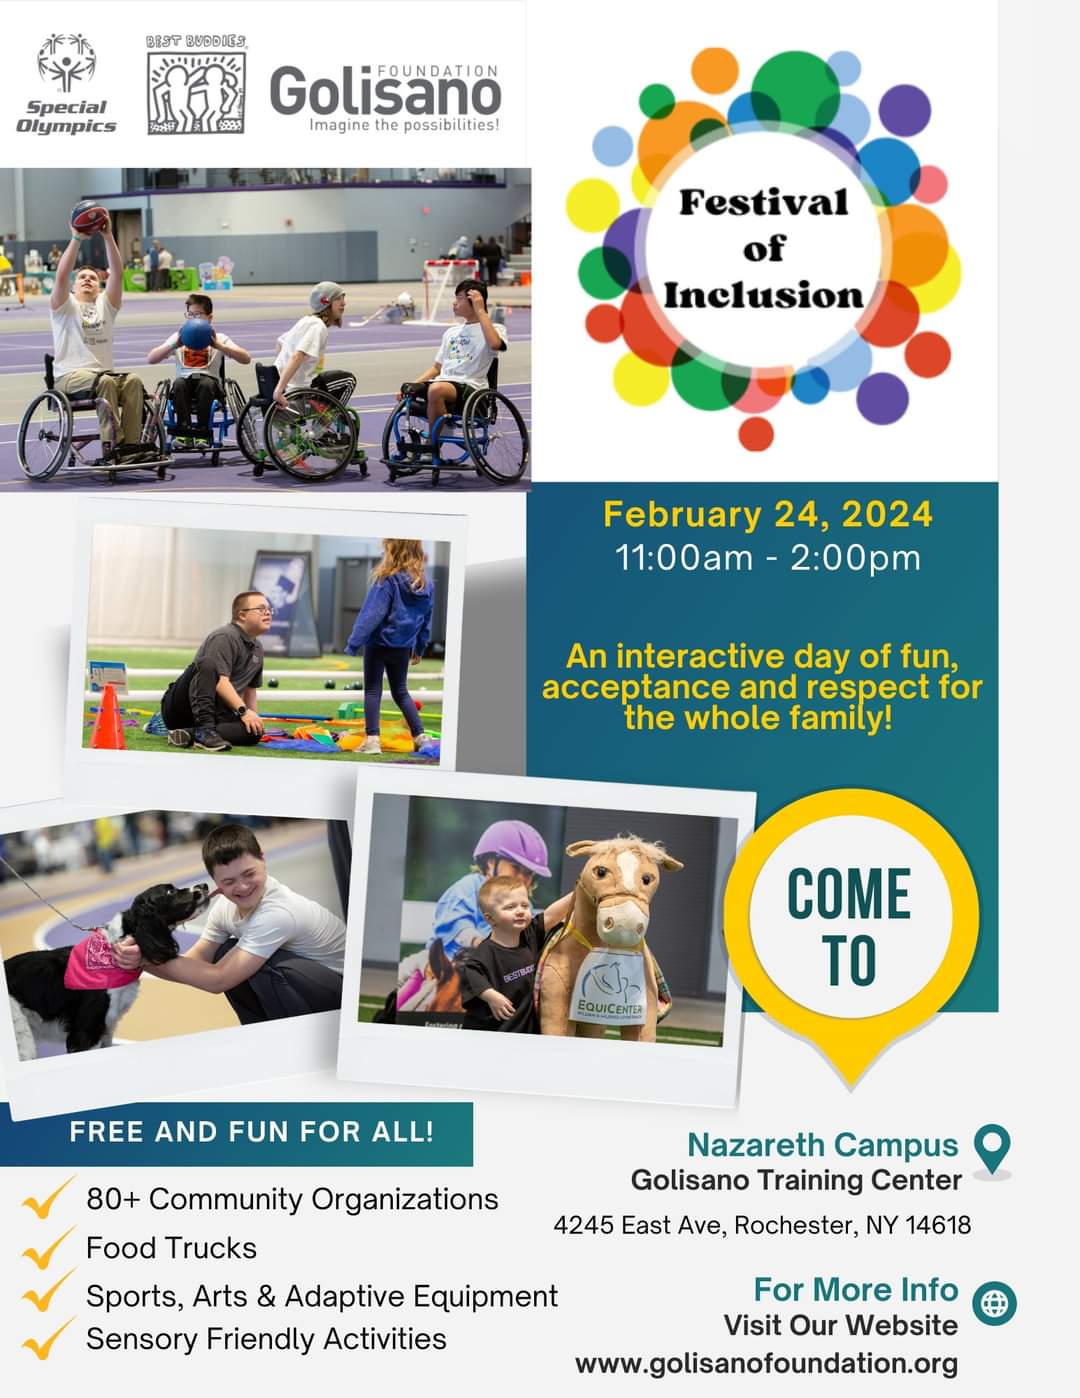 A flyer with pictures of youth playing wheelchair basketball, hugging a dog, posing for photos with a large stuffed horse, and playing with large building blocks on a gym floor.